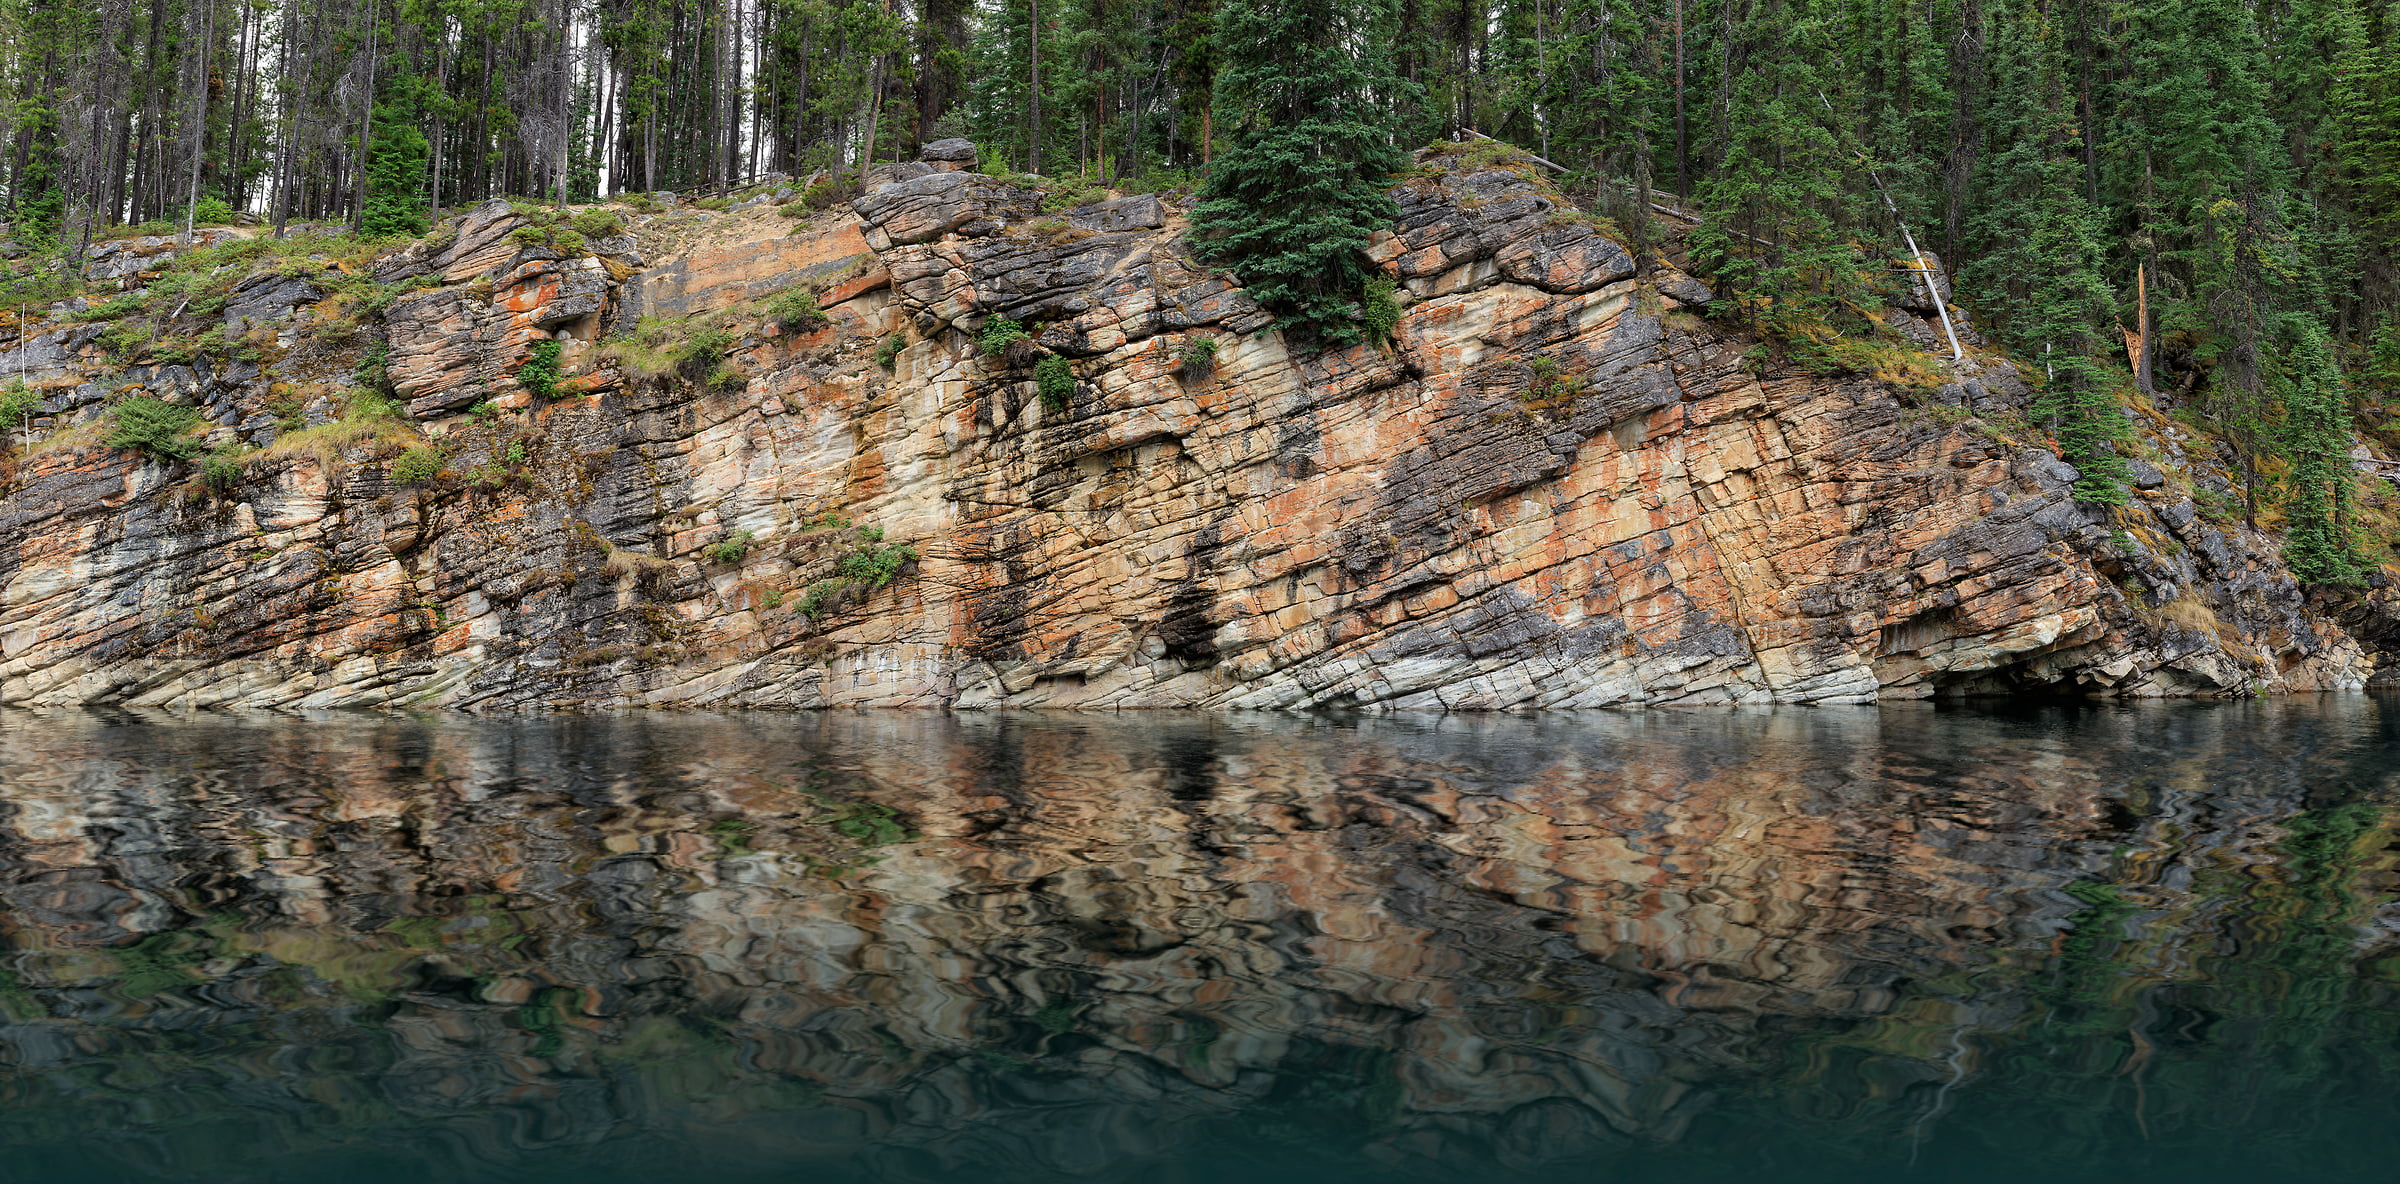 3,135 megapixels! A very high resolution, large-format photo of a rock wall, a calm lake, and an evergreen forest; nature photograph created by Scott Dimond at Horseshoe Lake in Jasper National Park, Alberta, Canada.